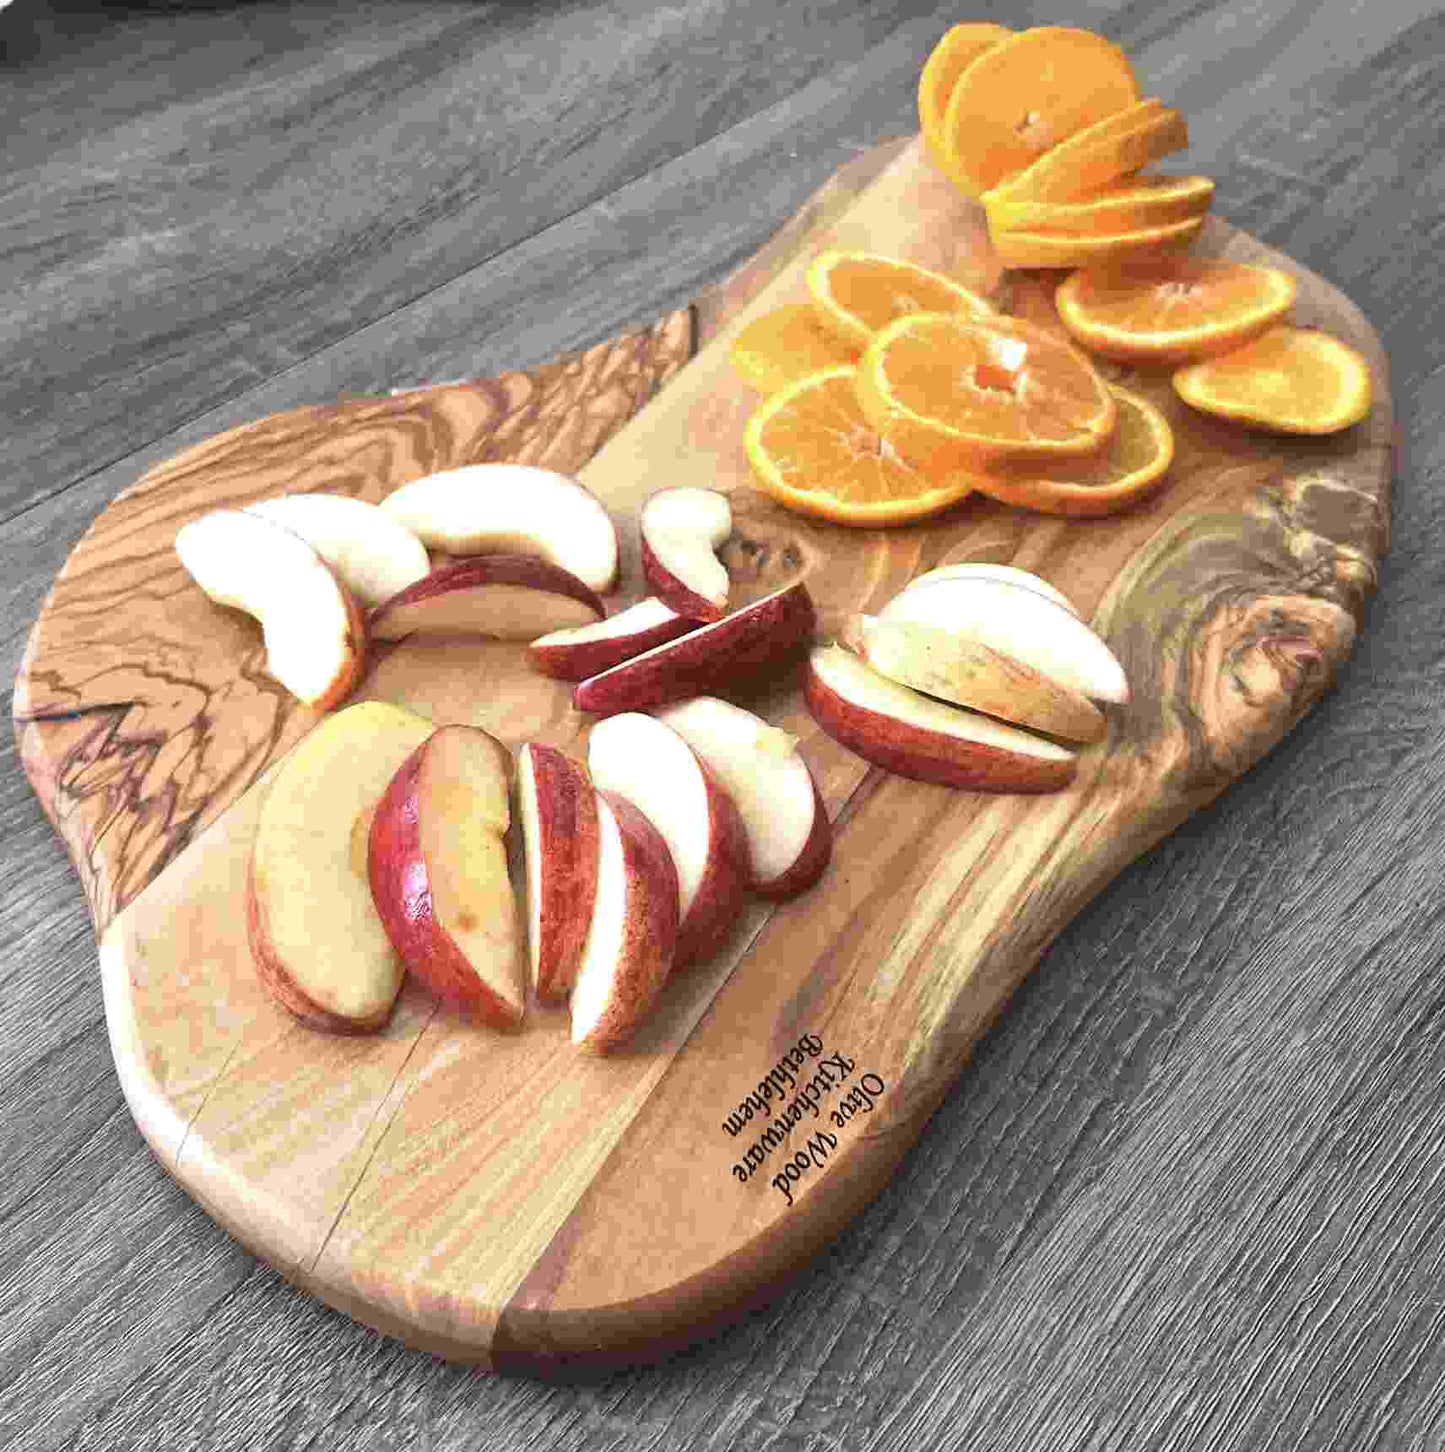 Unique Wooden Cutting Board / Charcuterie Board Handmade from Olive Wood Grown in Holy Land